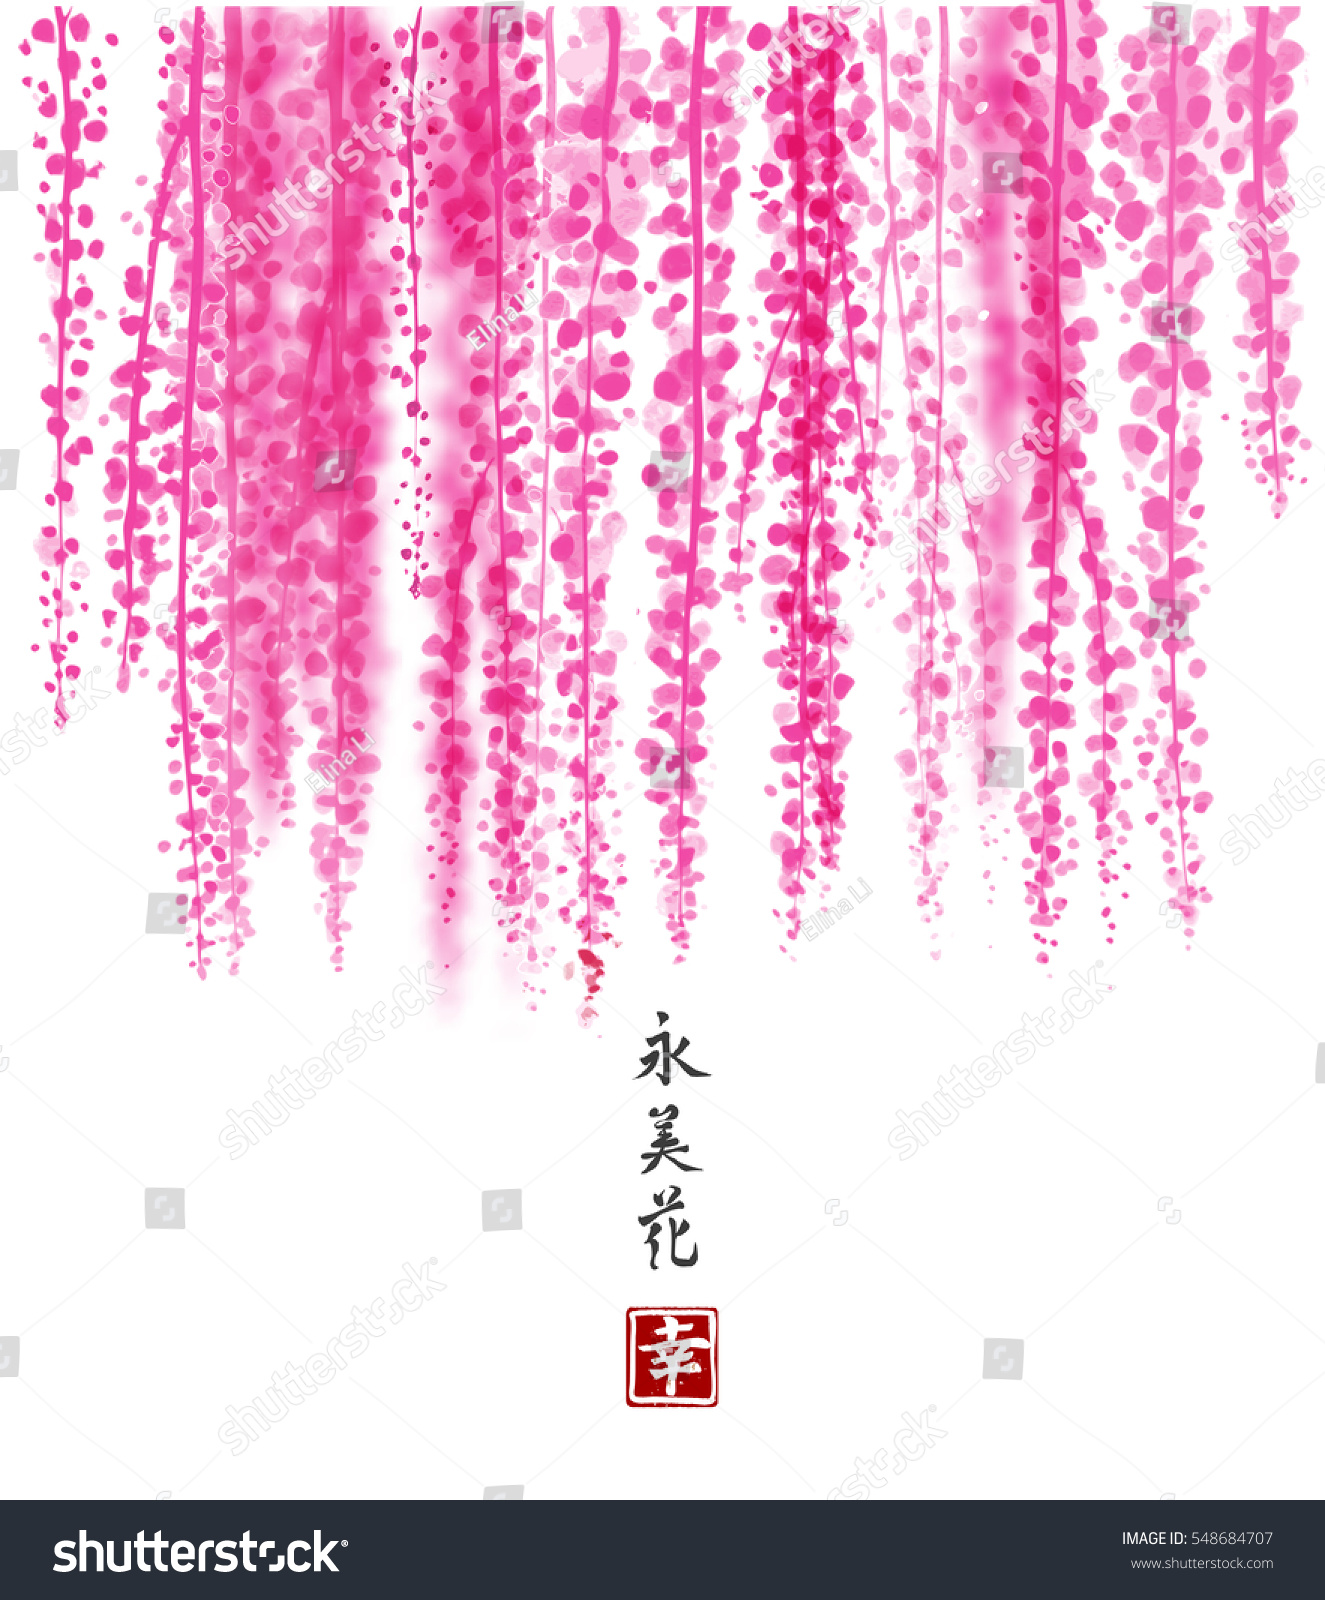 SVG of Pink Wisteria hand drawn with ink on white background. Contains hieroglyph - happiness, eternity, beauty, flower. Traditional oriental ink painting sumi-e, u-sin, go-hua. Bunches of flowers. svg